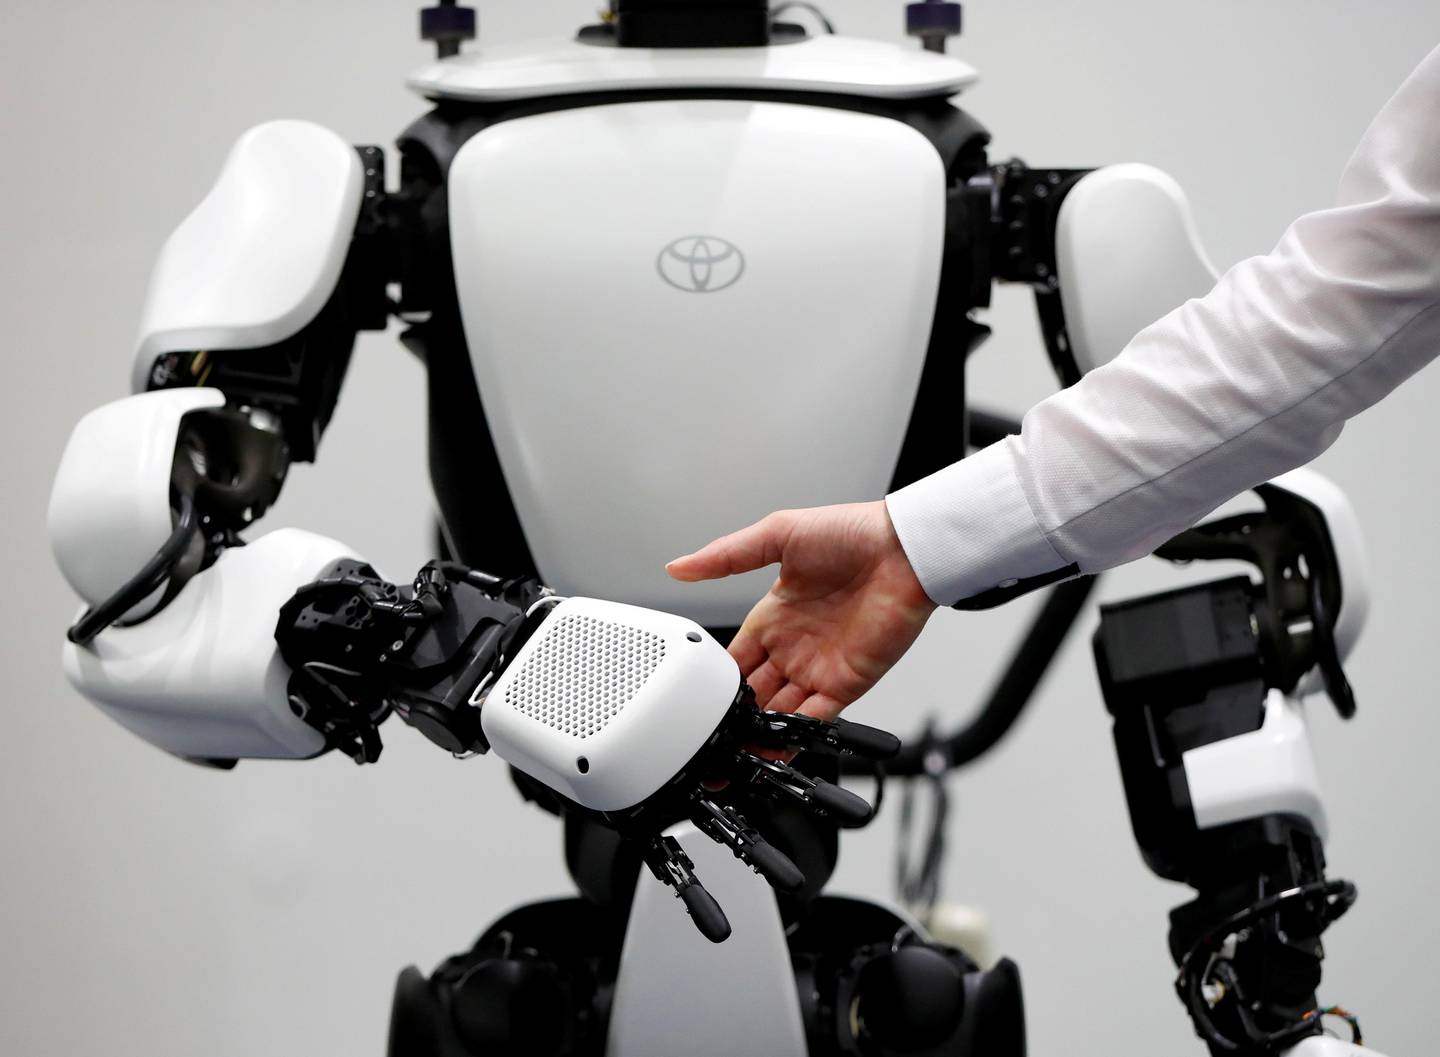 An employee of Toyota Motor Corp. demonstrates T-HR3 humanoid robot which will be used to support the Tokyo 2020 Olympic and Paralympic Games, during a press preview in Tokyo, Japan July 18, 2019. Picture taken July 18, 2019.  REUTERS/Issei Kato